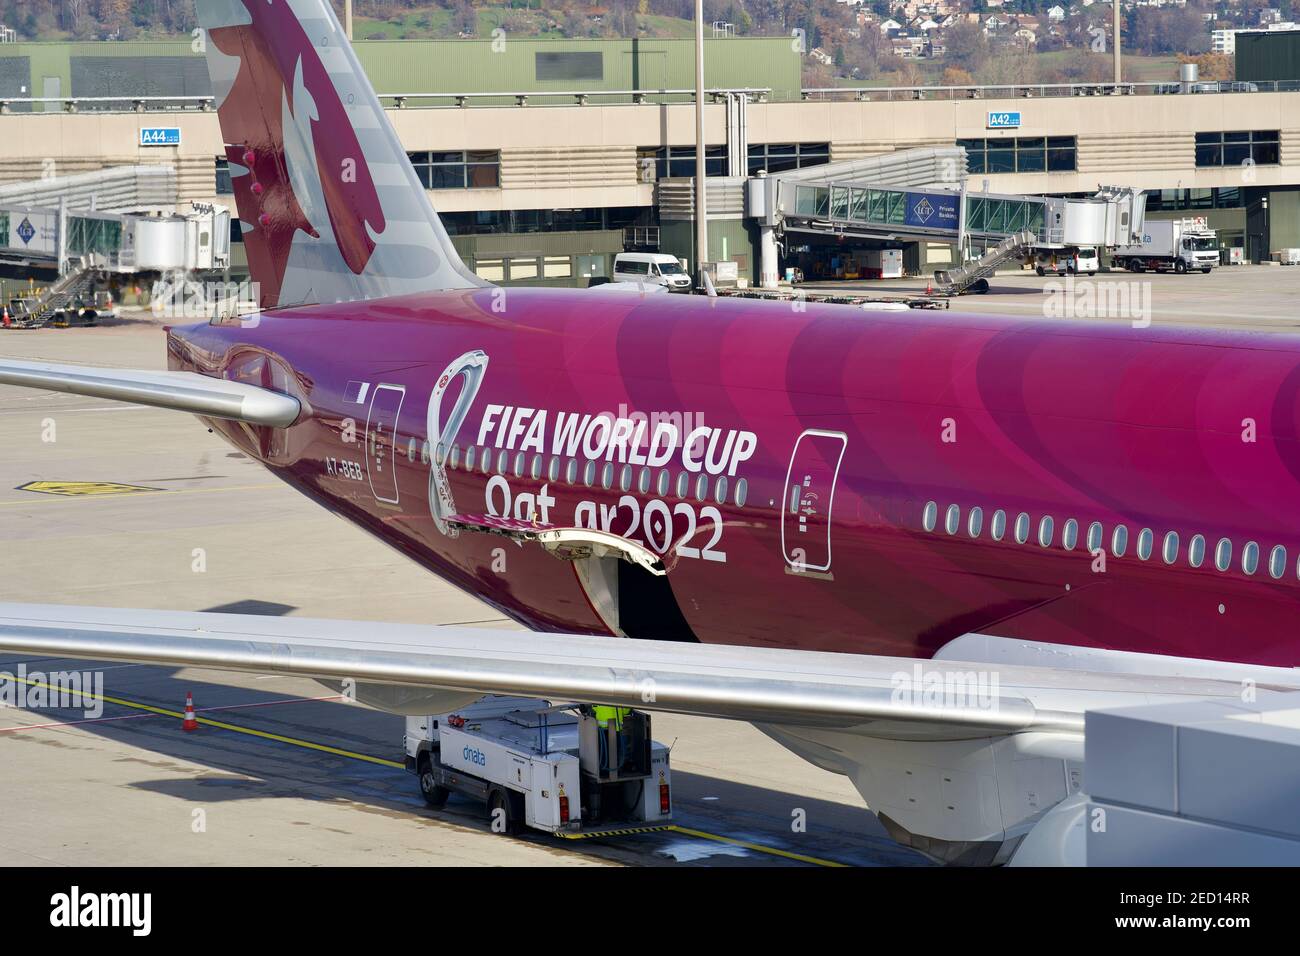 Qatar Airplane Beb At Zurich International Airport Zrh Lszh First Commercial Flight With 22 World Cup Livery Photo Taken November 21st Stock Photo Alamy